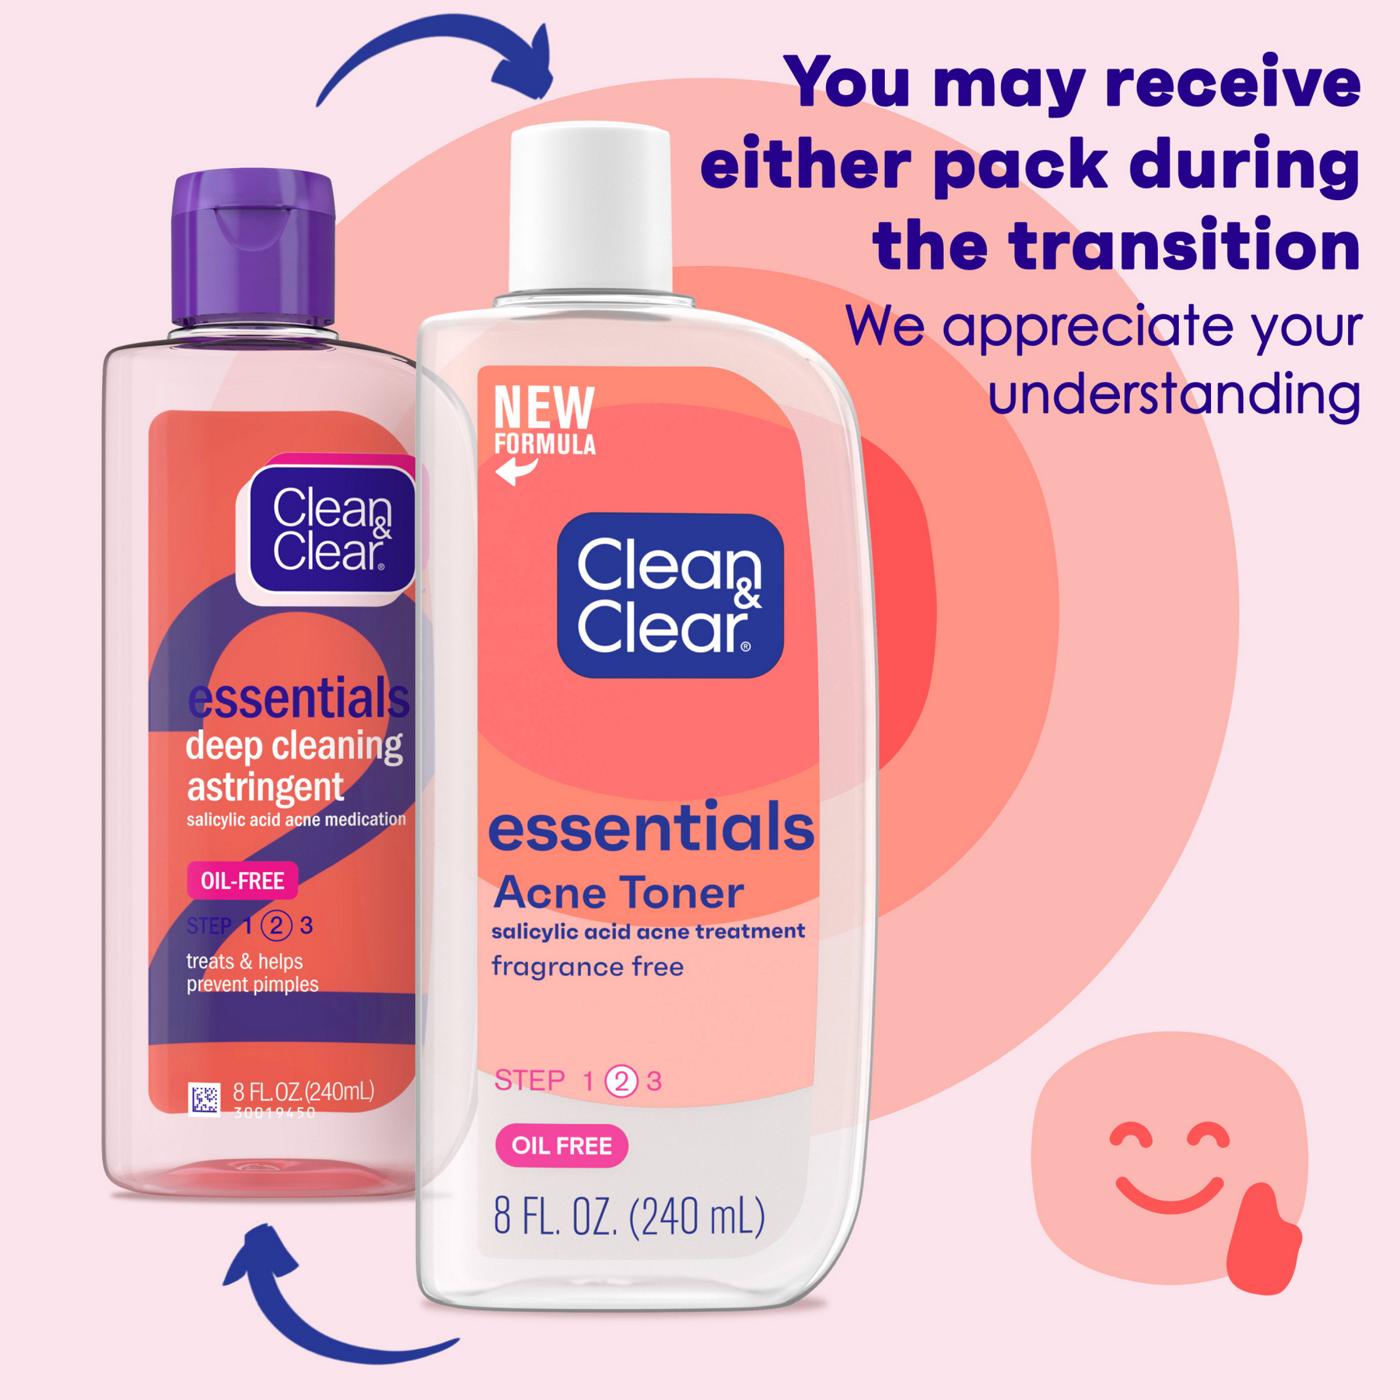 Clean & Clear Essentials Acne Toner; image 3 of 5